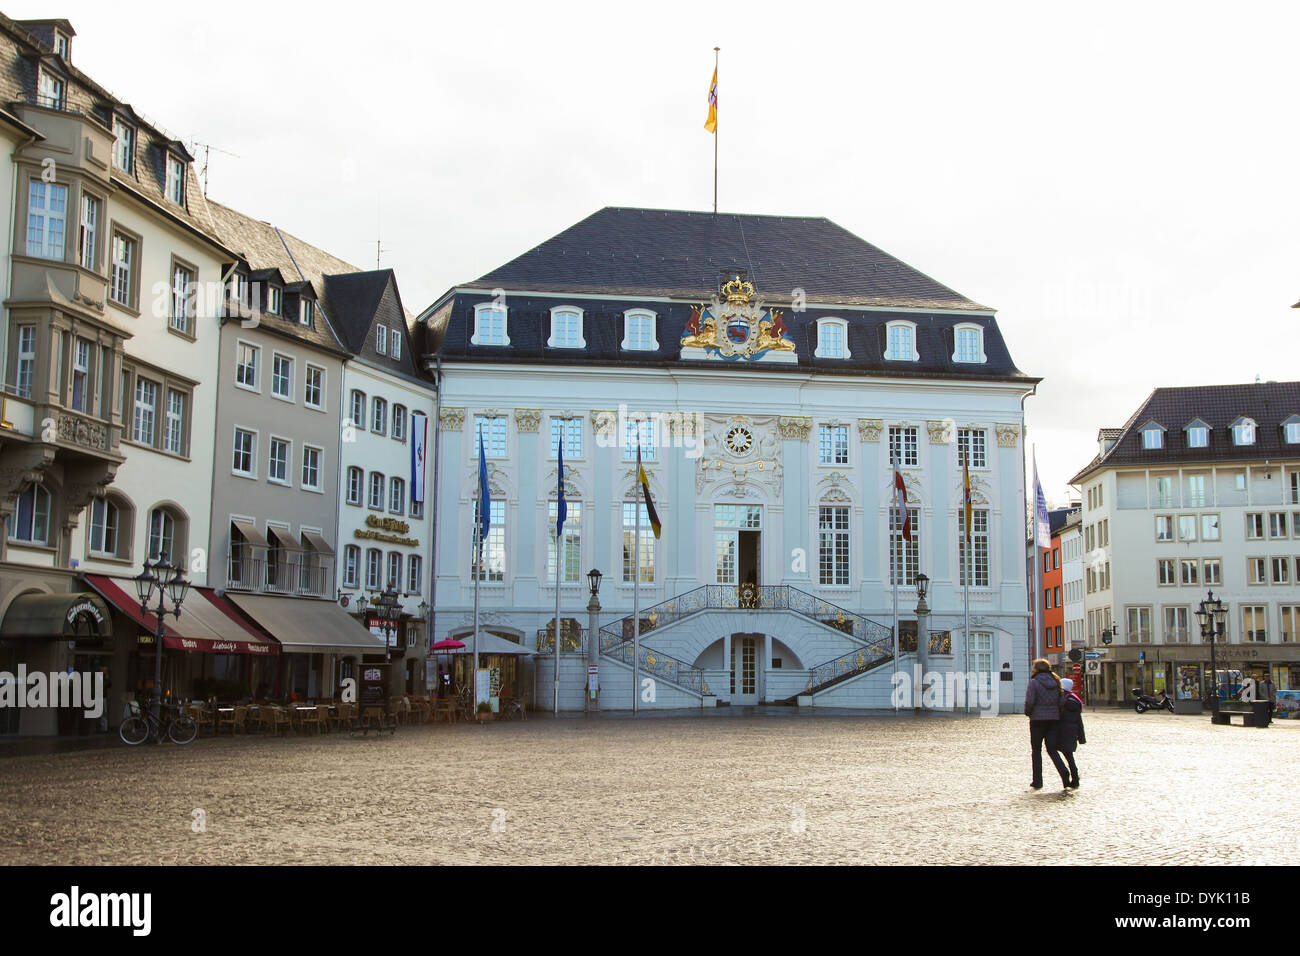 BONN, GERMANY - FEBRUARY 16, 2014: Unidentified people in front of the Old City Hall in Bonn, North Rhine Westphalia, Germany. Stock Photo